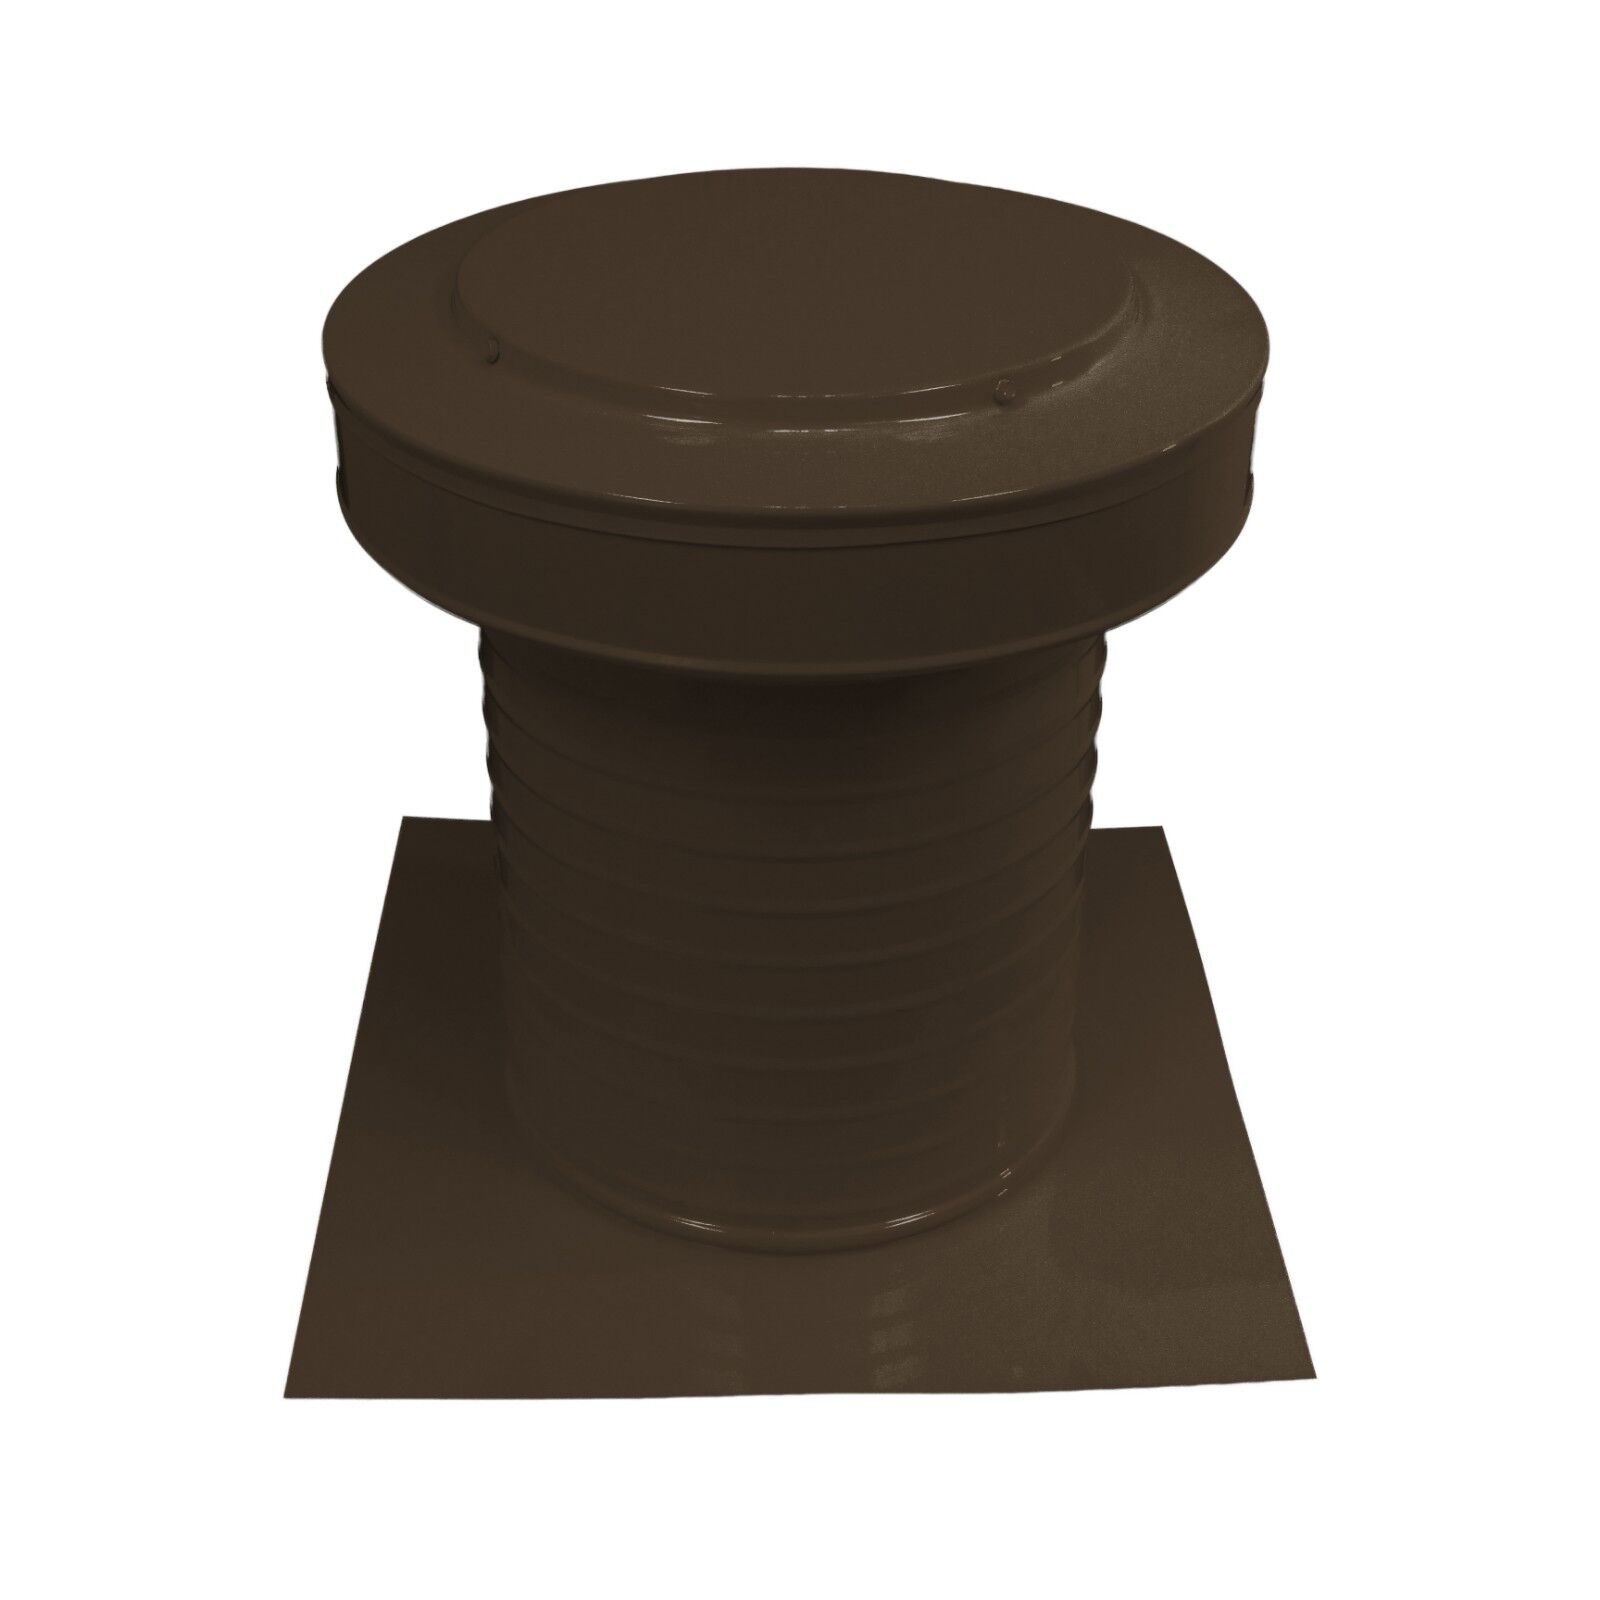 10 Inch Diameter Keepa Vent An Aluminum Roof Vent For Flat Roofs In Brown